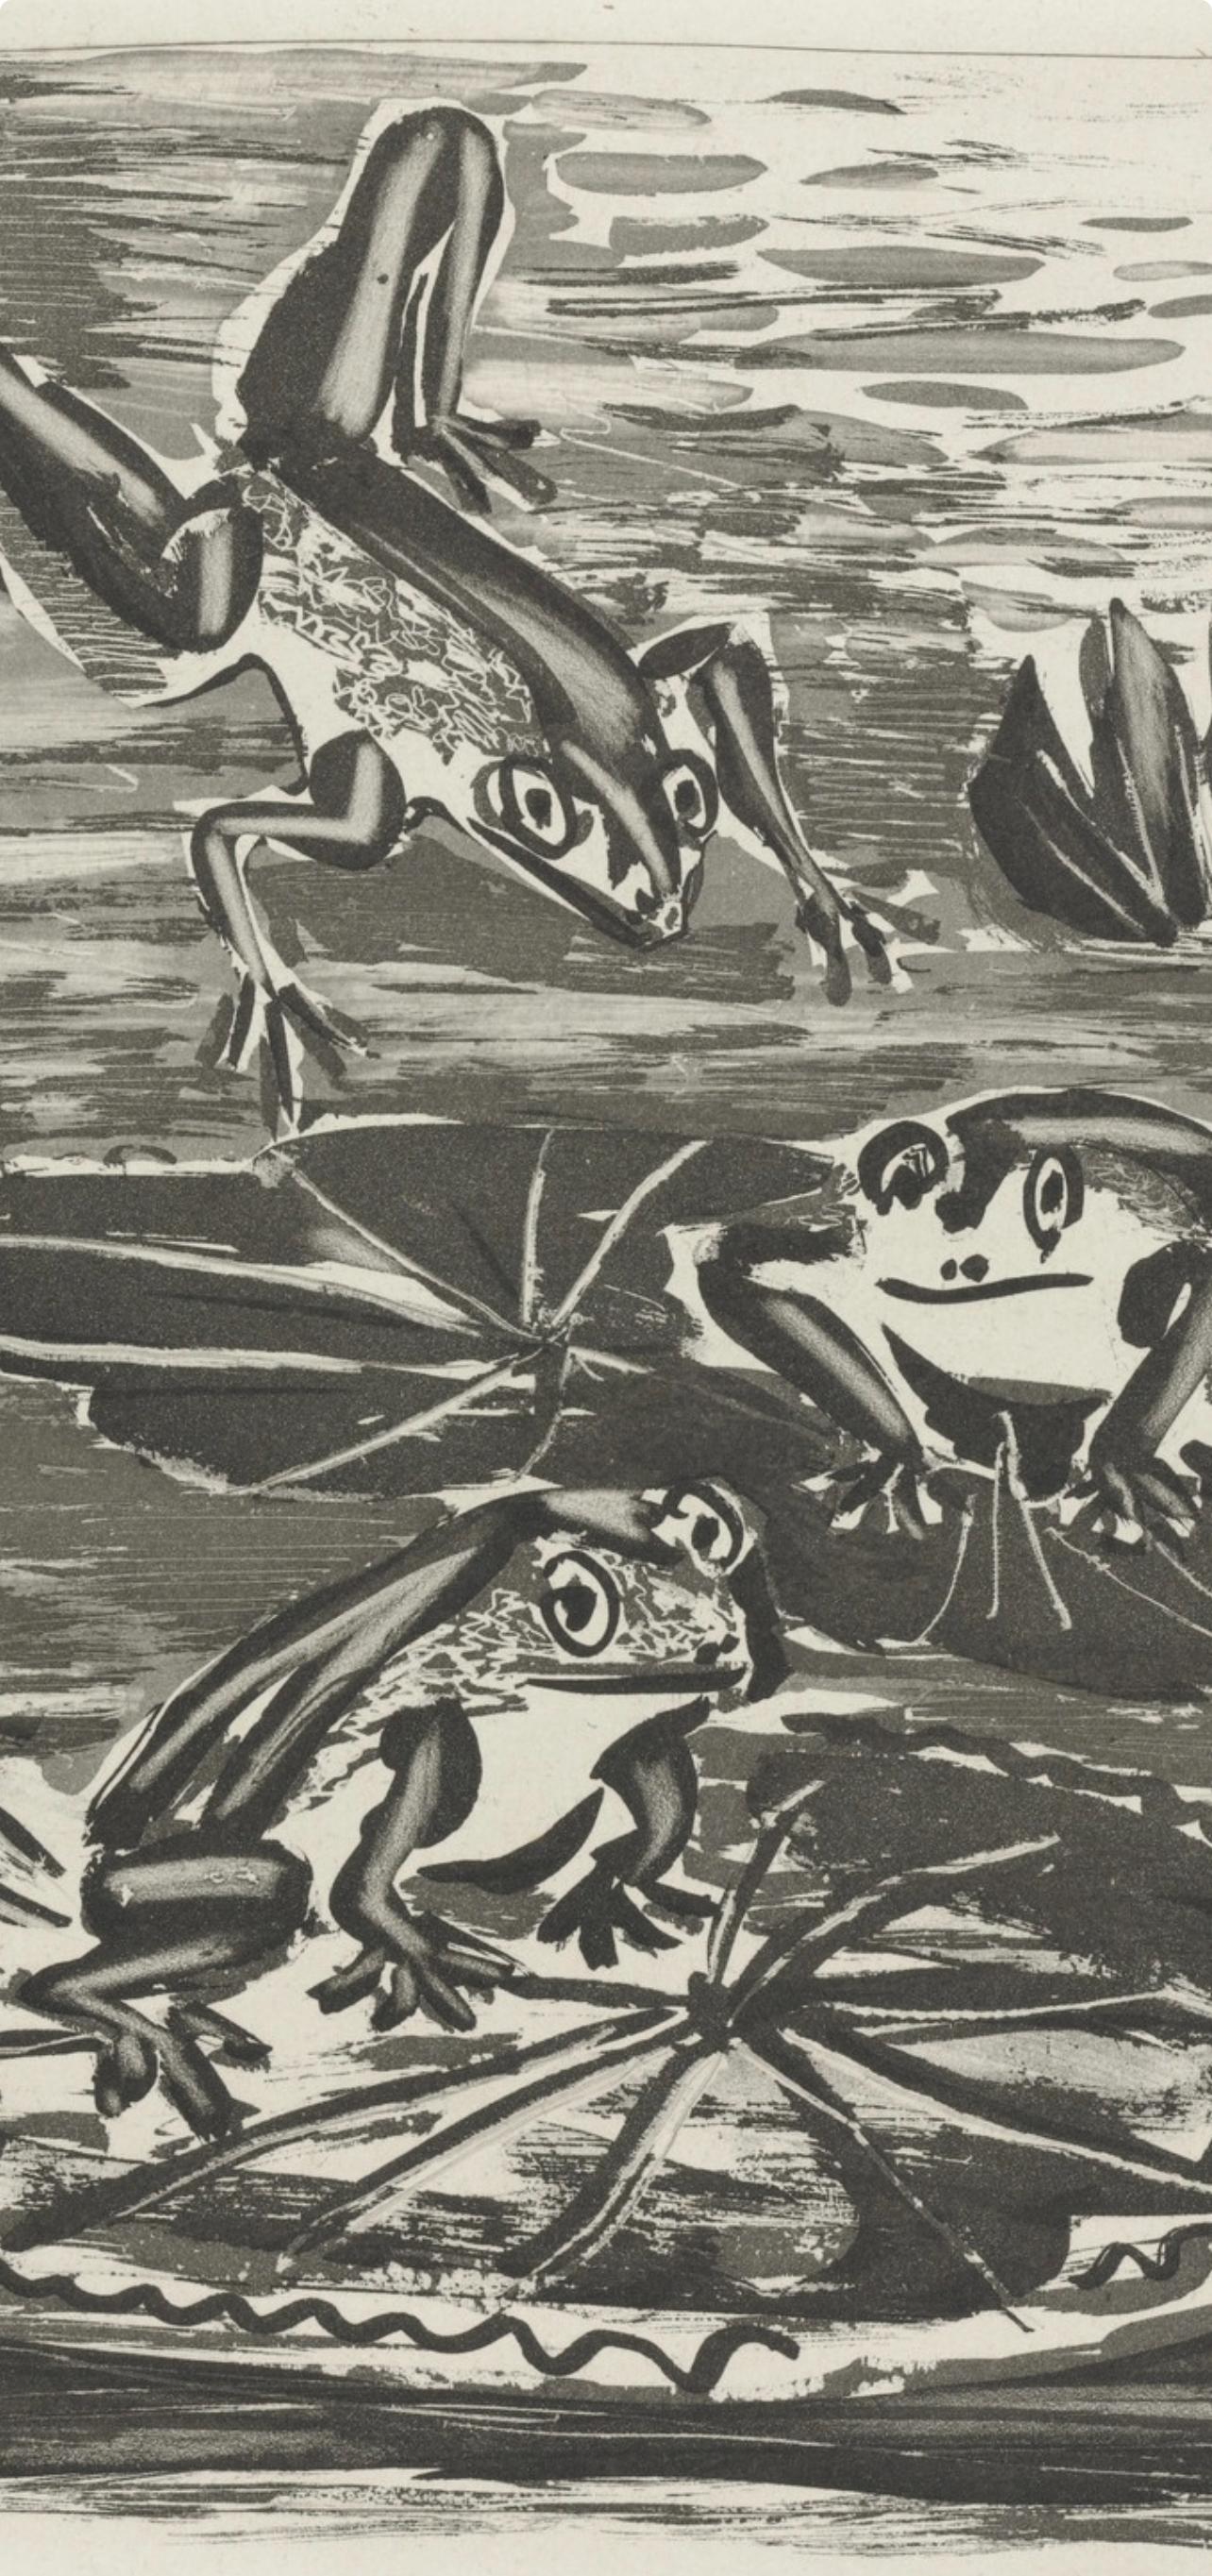 Picasso, La Grenouille, Histoire naturelle (after) - Modern Print by Pablo Picasso